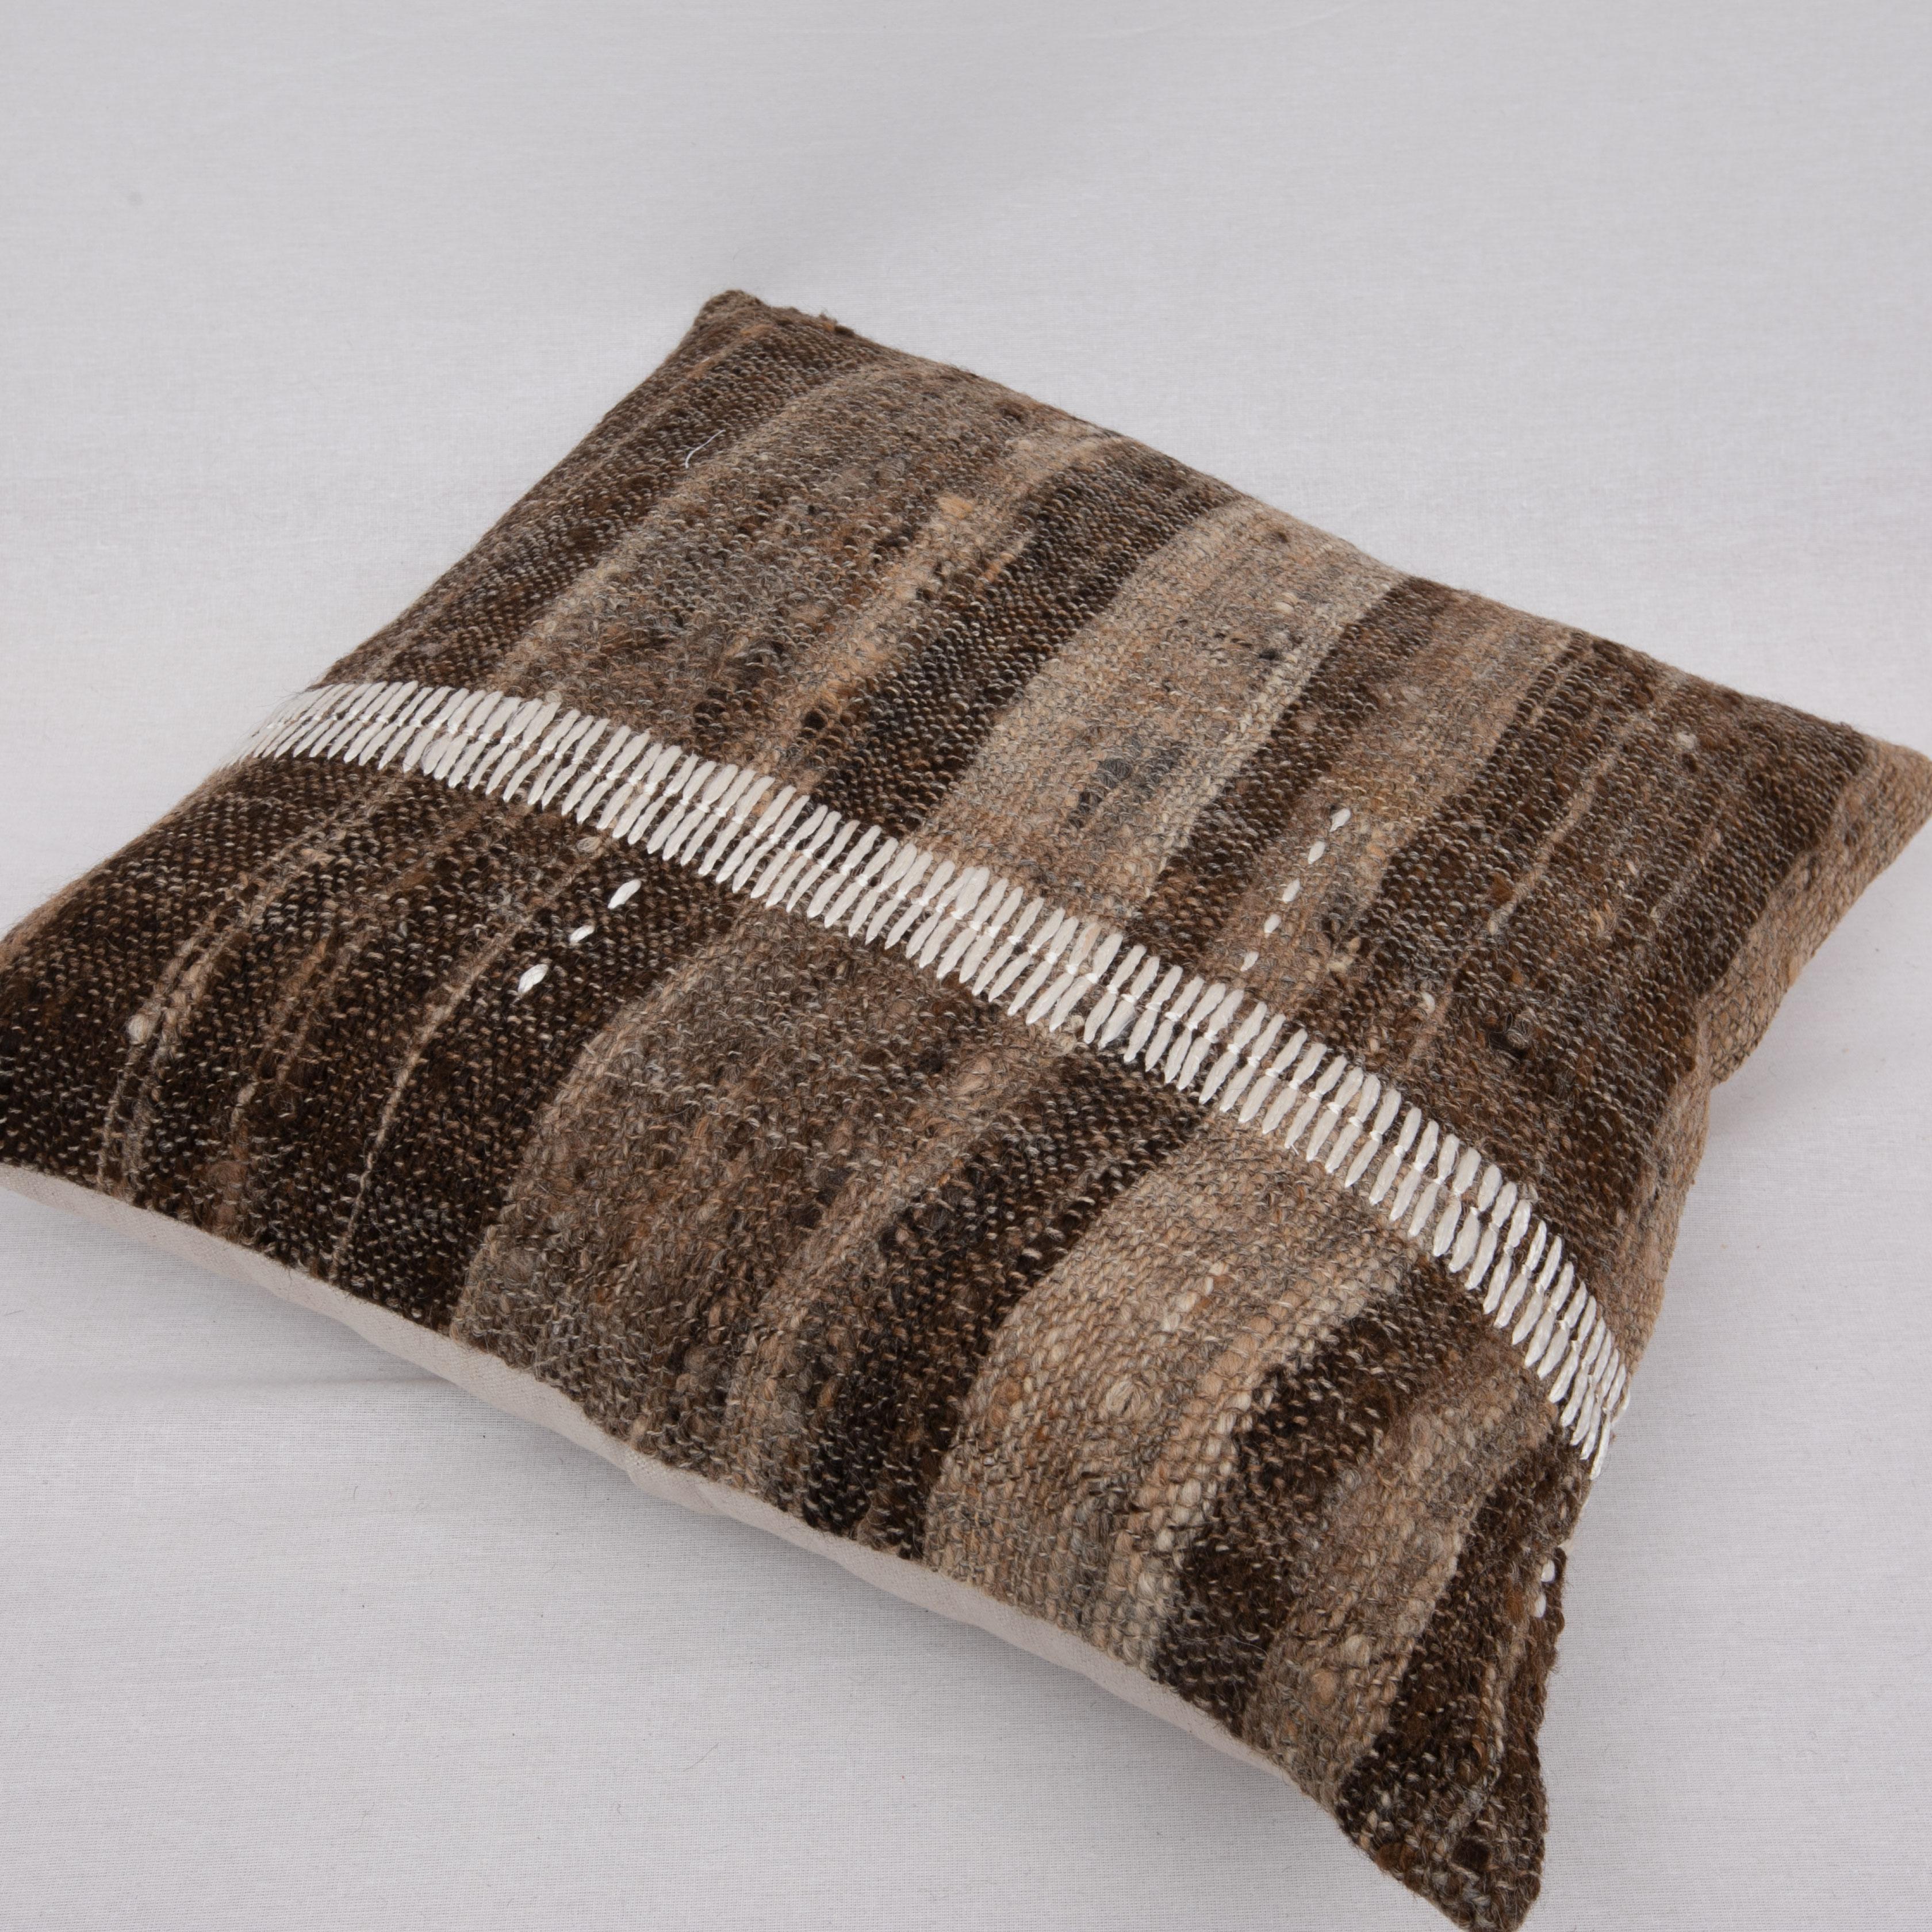 20th Century Rustic Pillow Case Made from a Vintage Un-Dyed Wool Coverlet, Mid 20th C